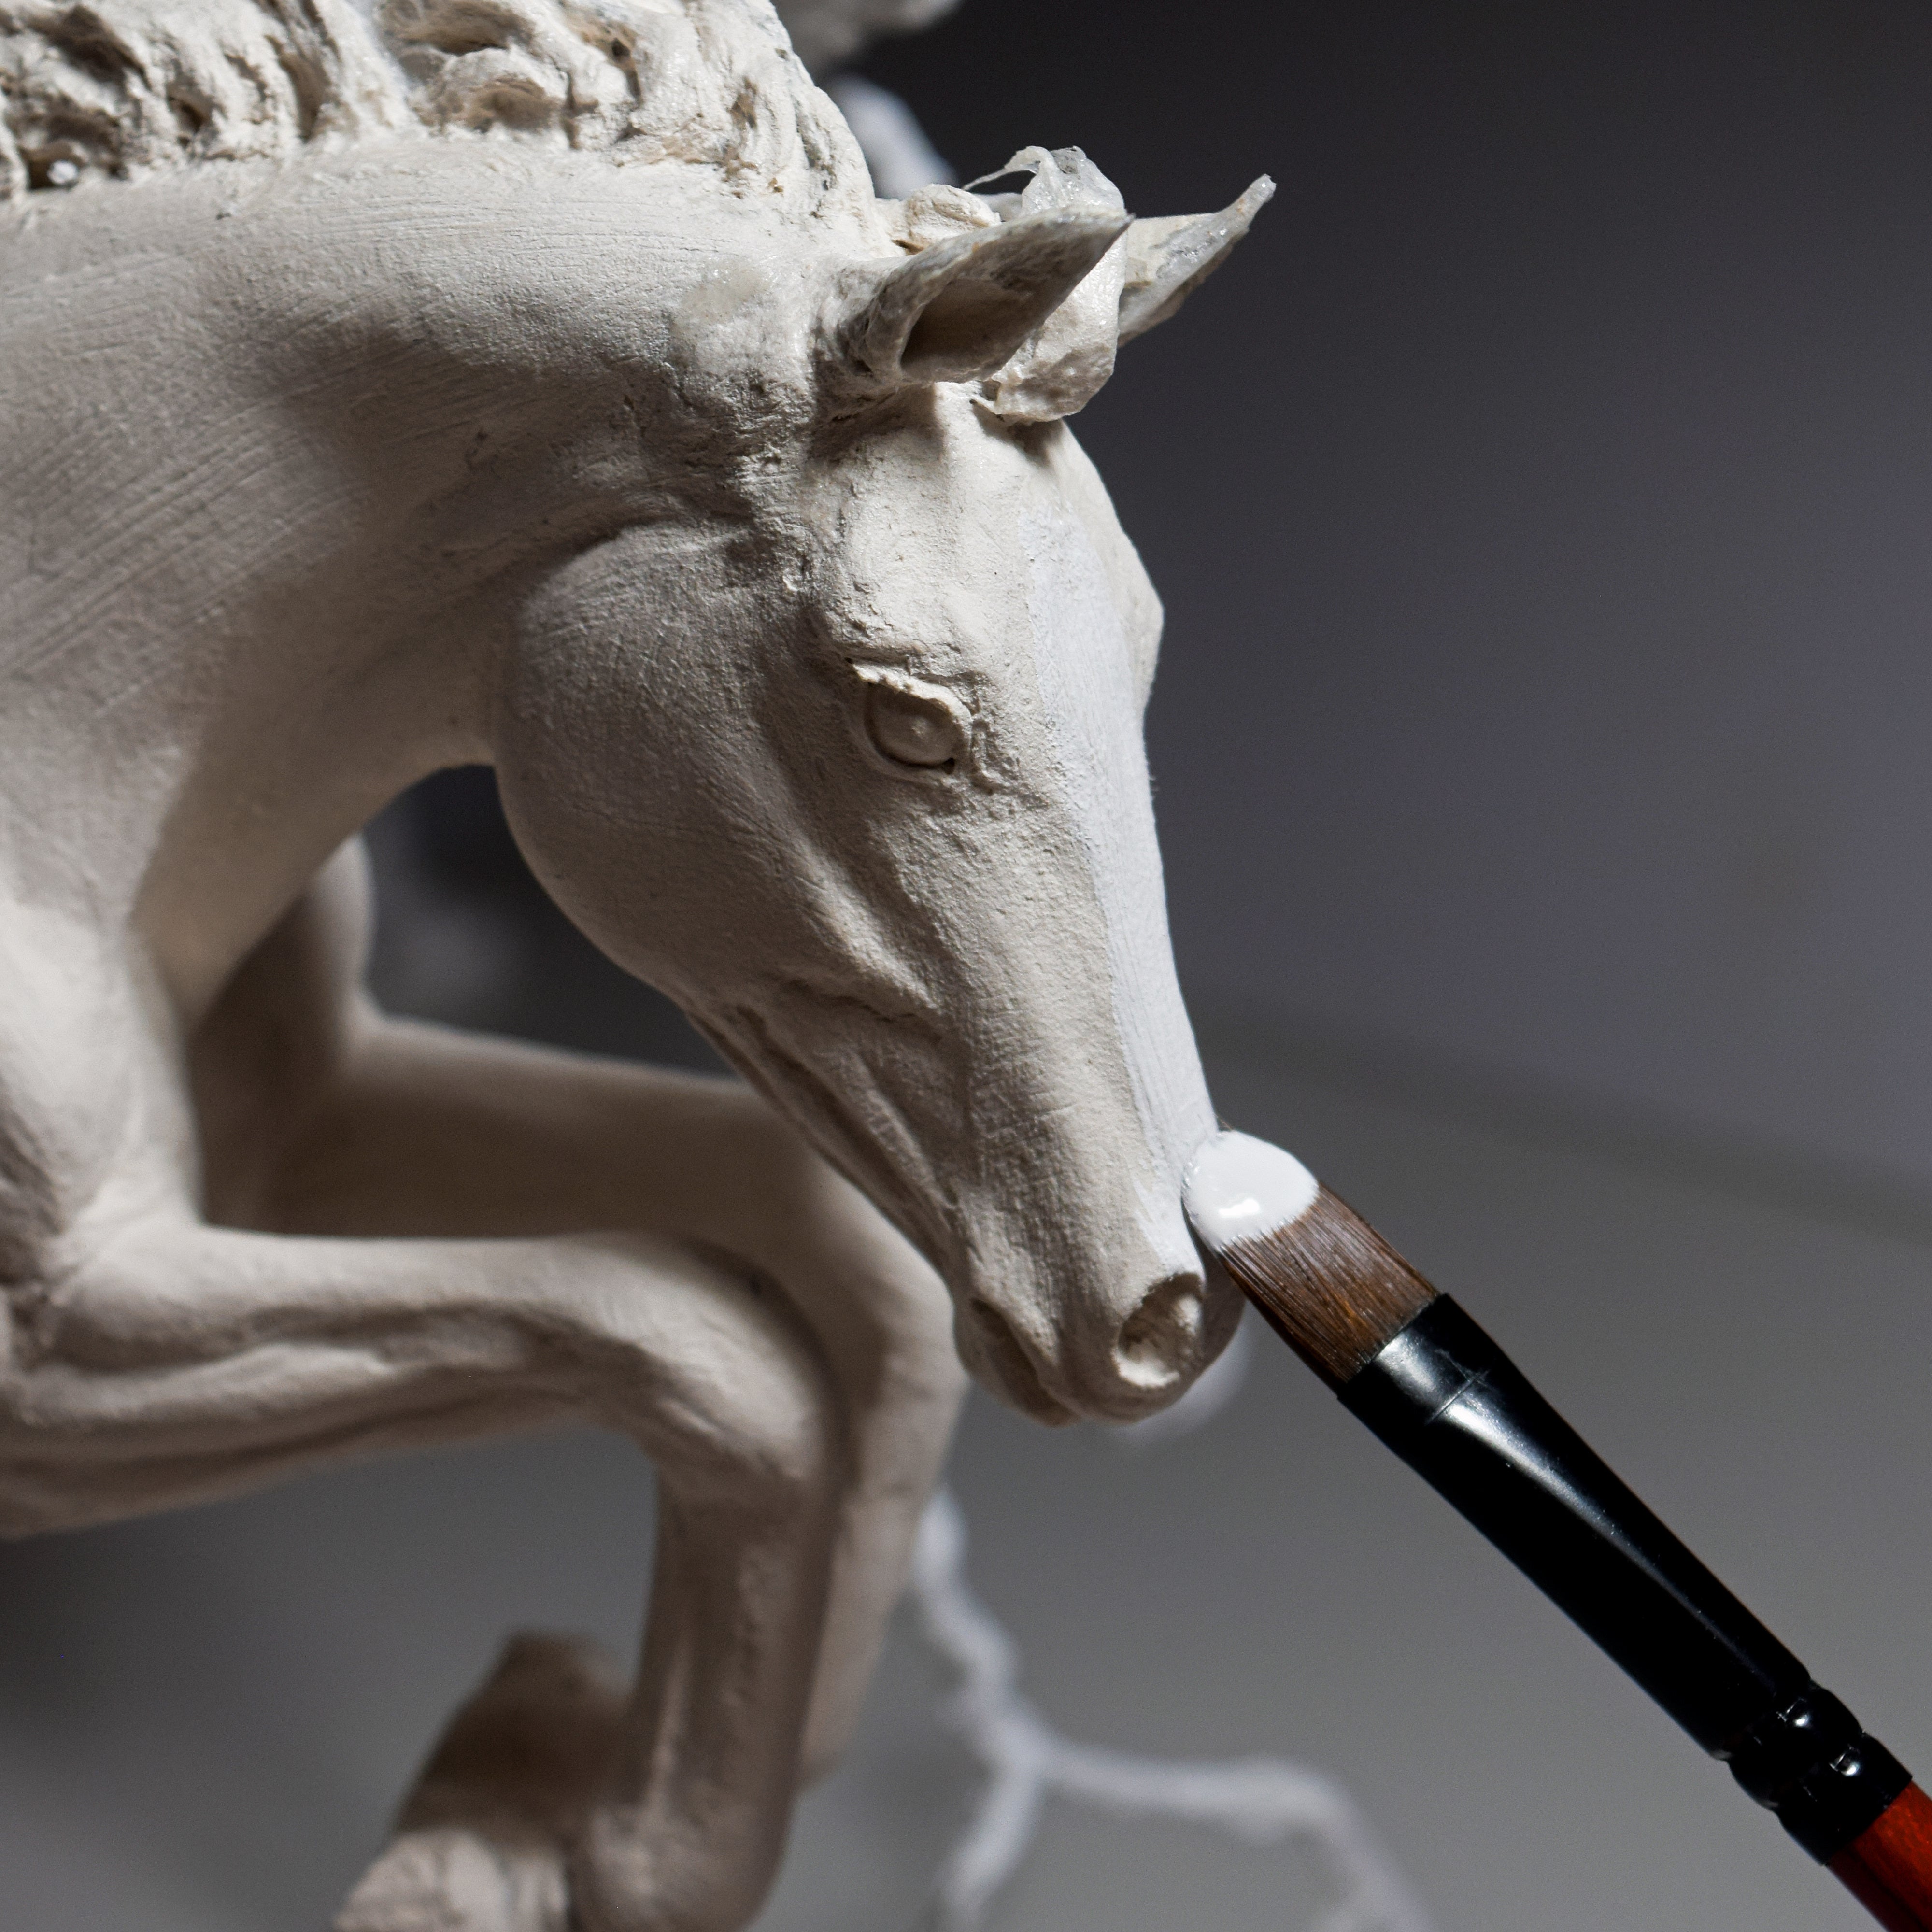 To Seal and Protect: Varnishing Air Dry Clay Sculptures - Susie Benes